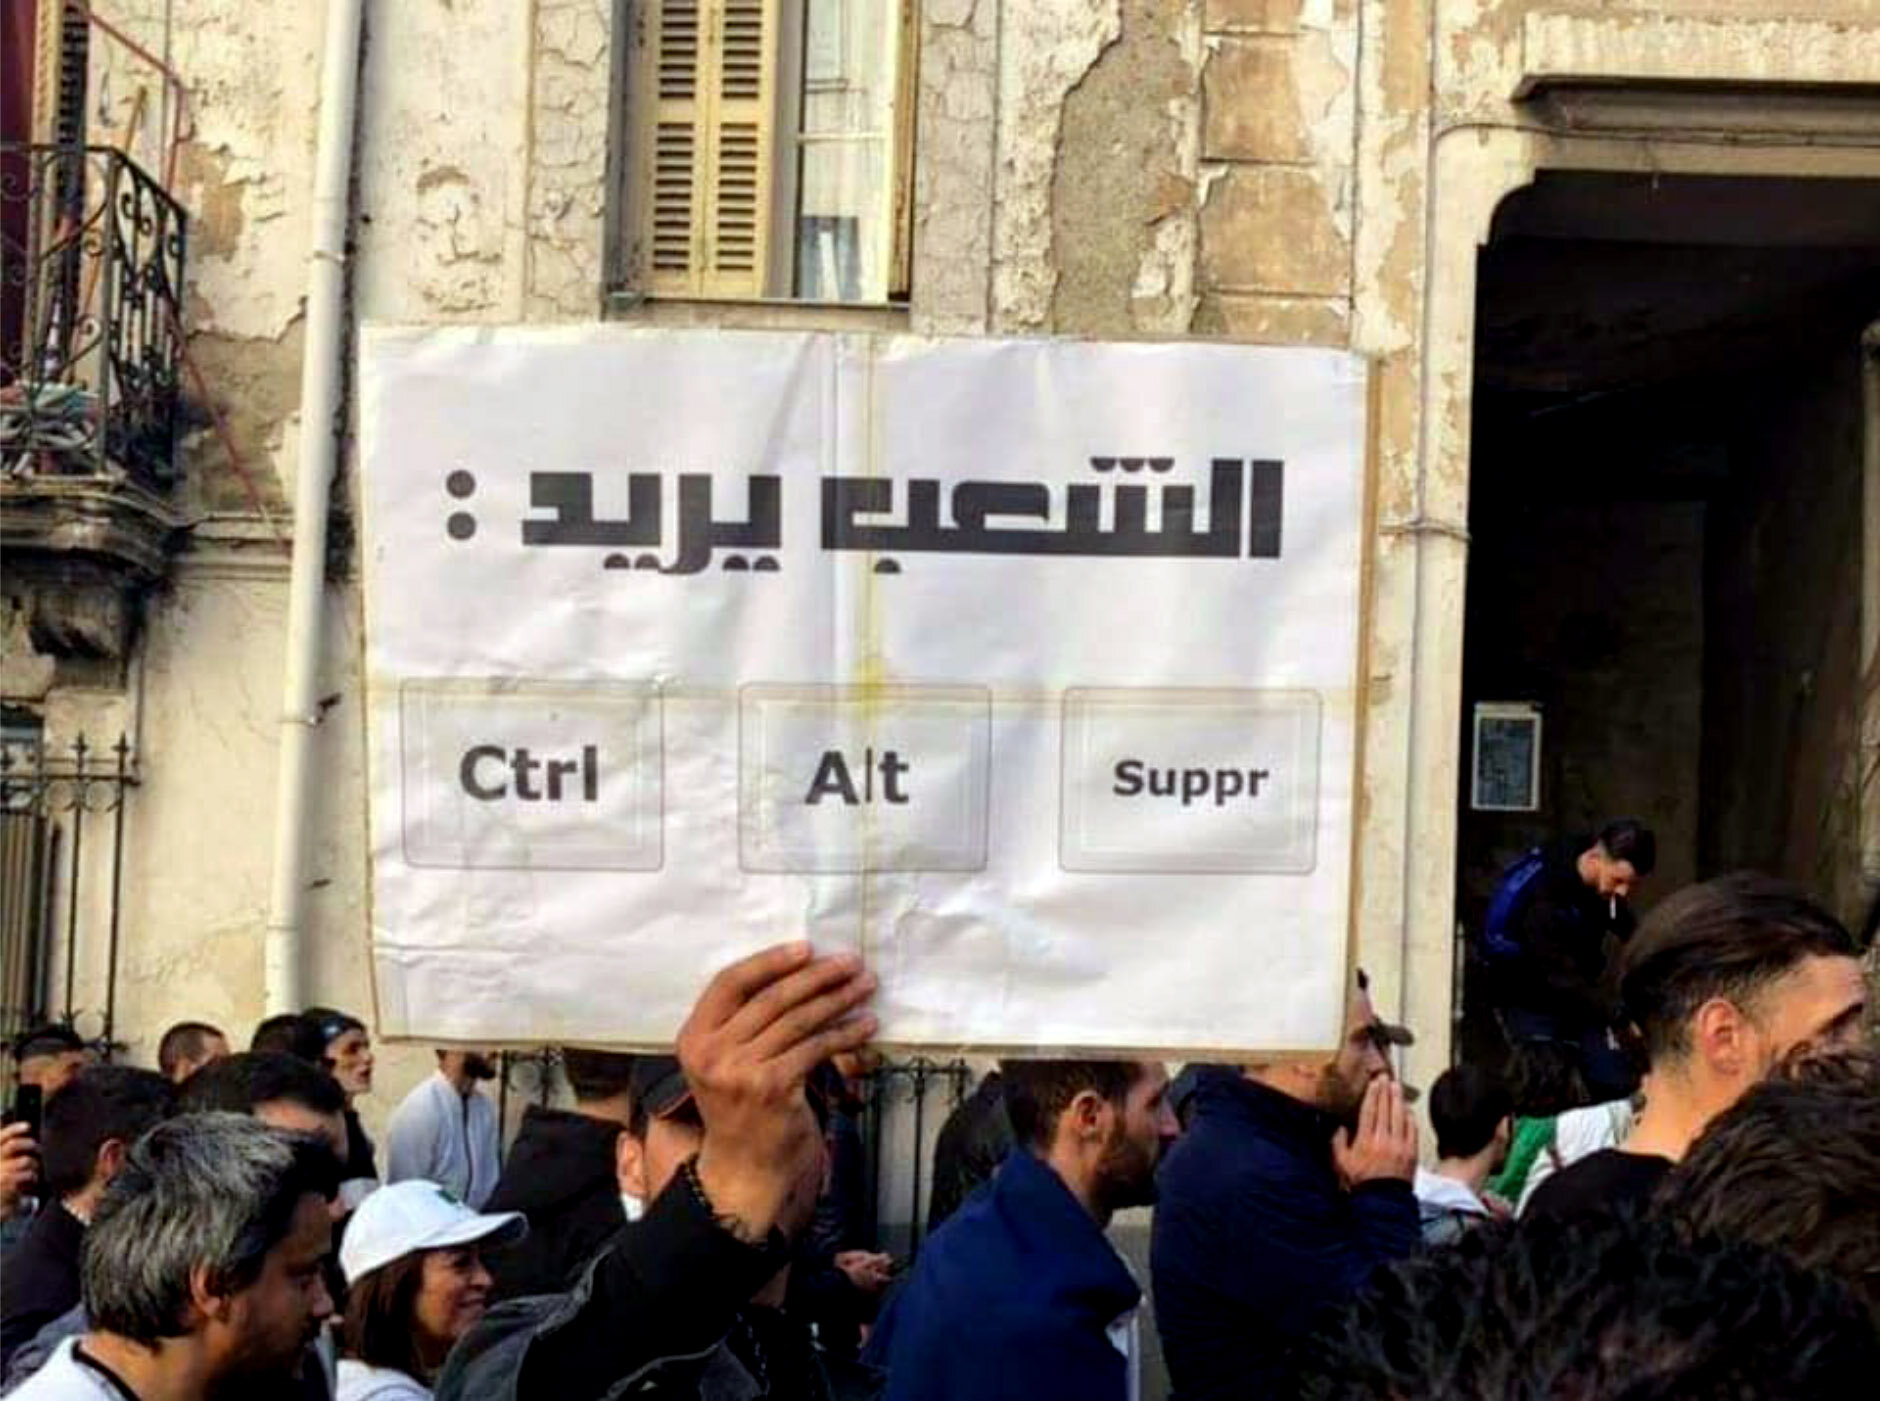 The People are Demanding Ctrl Alt Delete, Algiers, February 2019 (Photo: unknown)